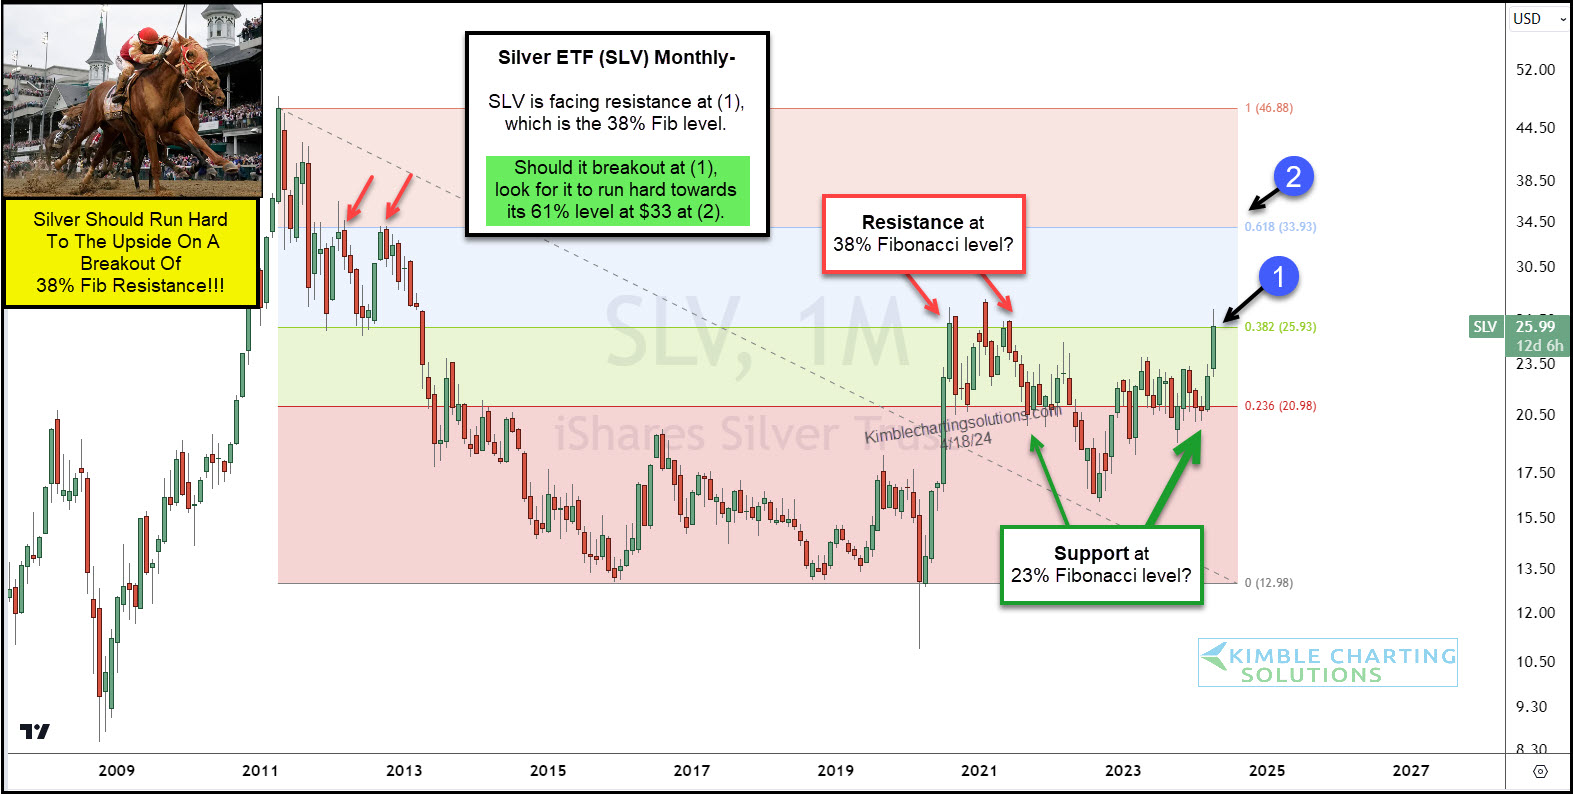 Silver ETF (SLV)-Monthly Chart